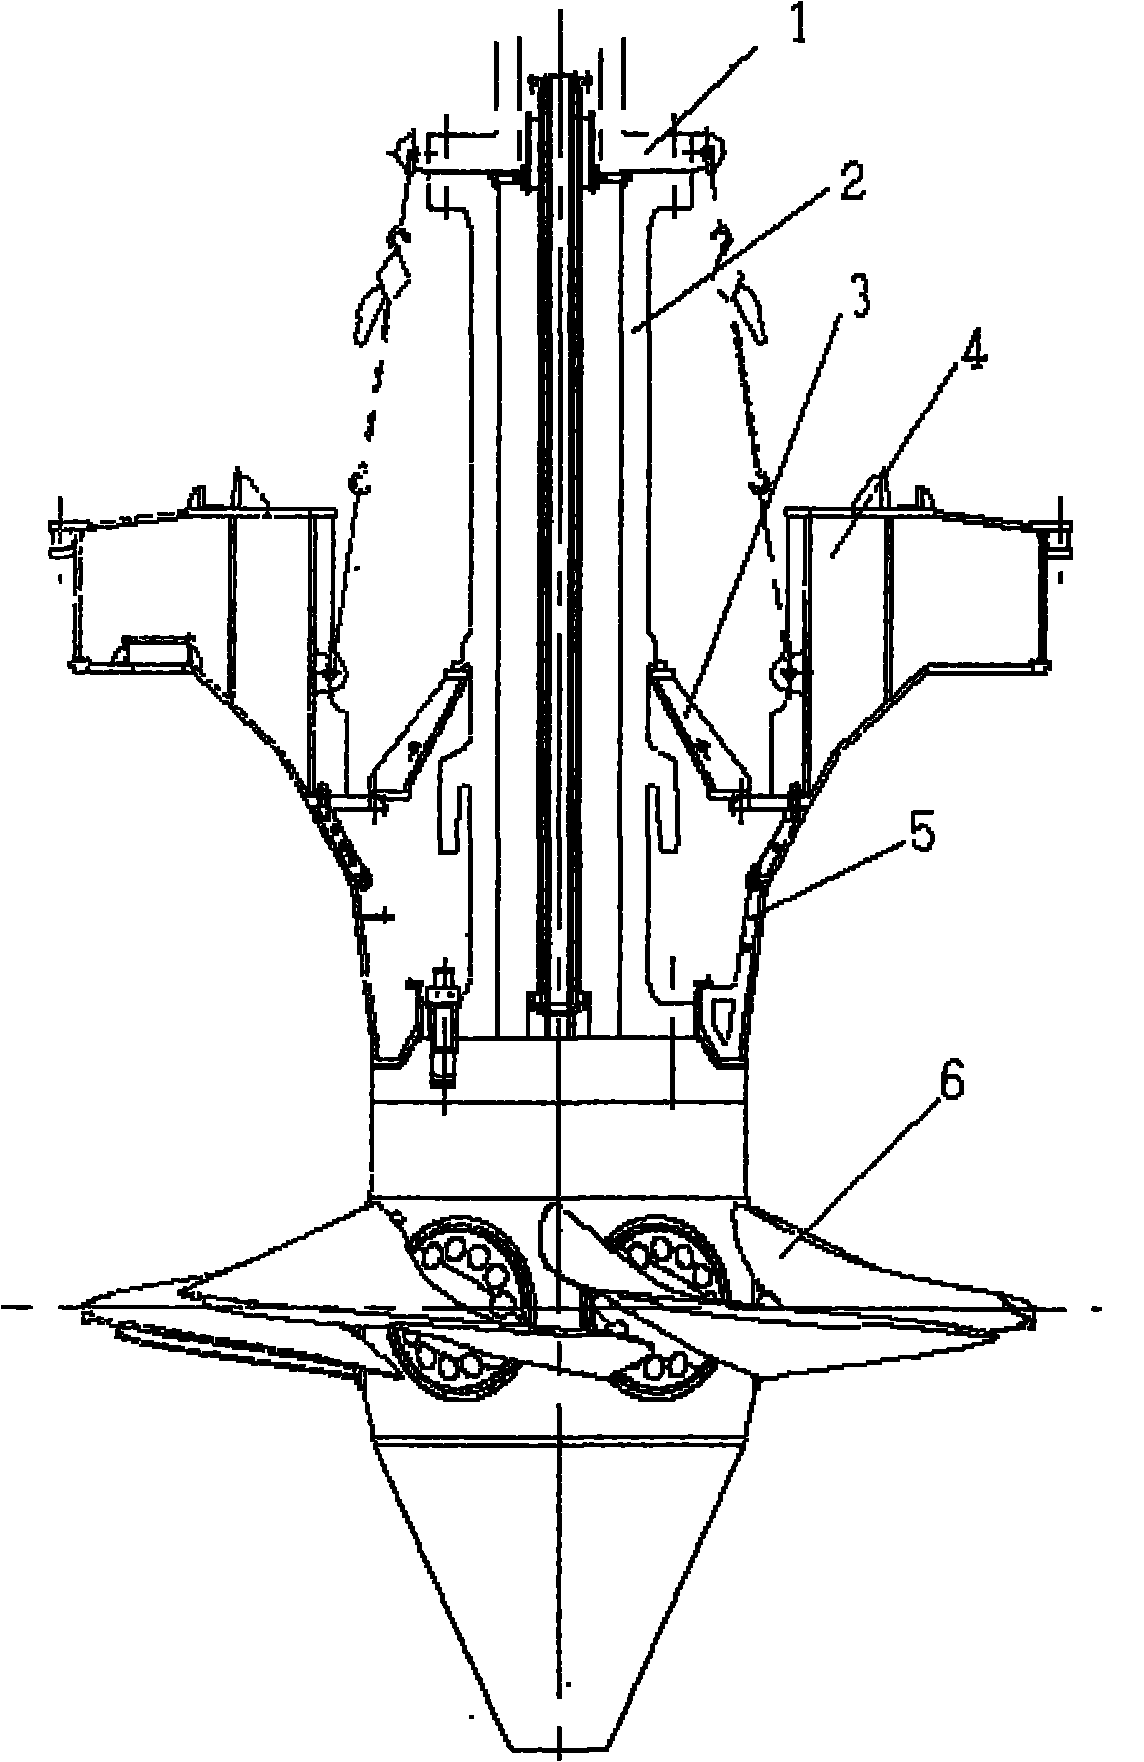 Hoisting process for rotating wheel of vertical shaft axial flow hydraulic turbine